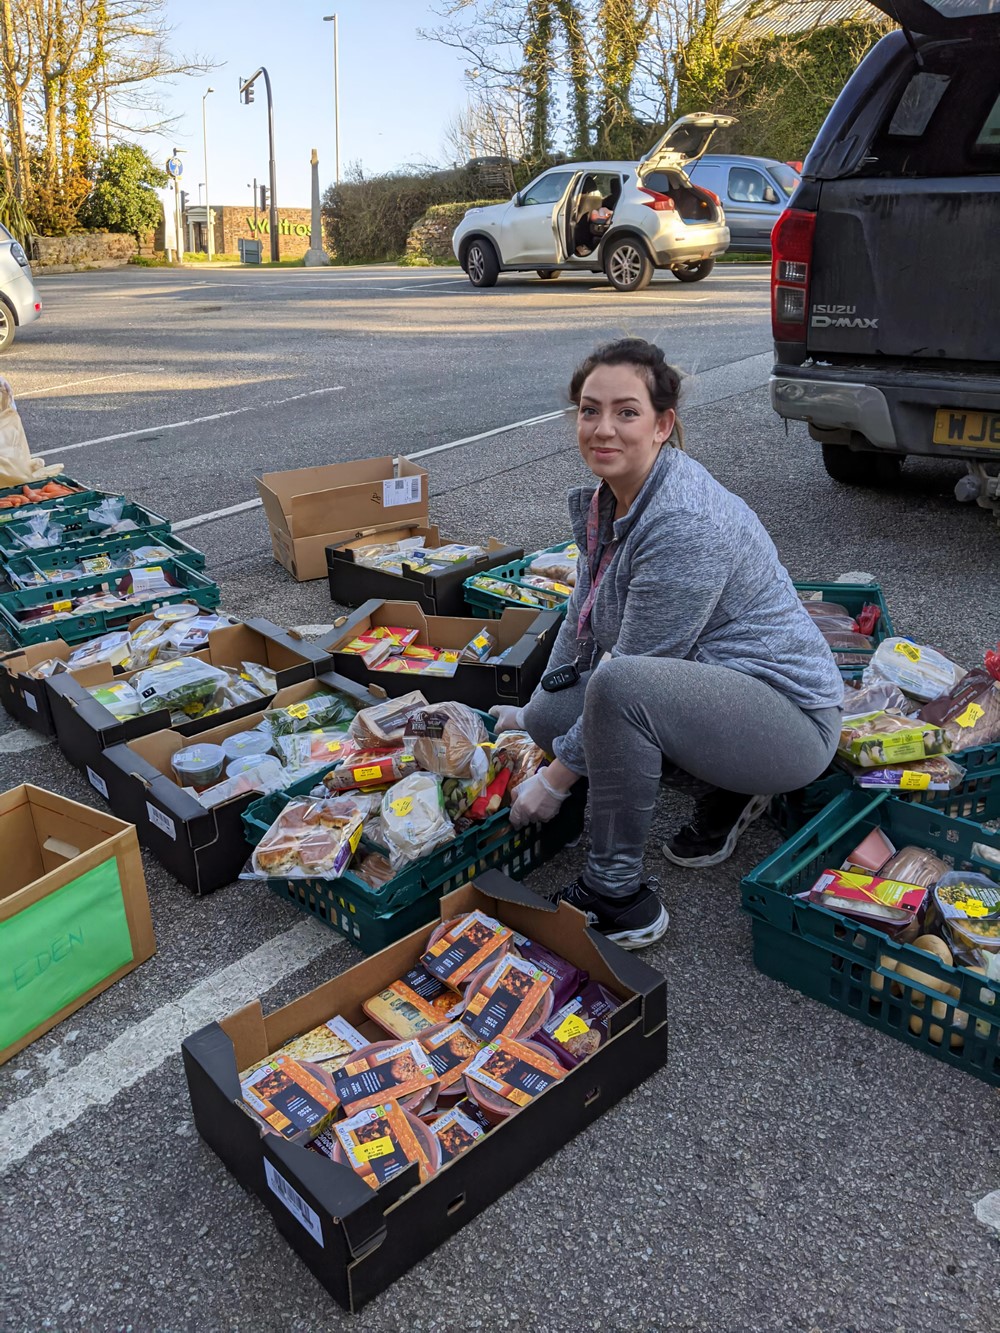 Lady crouching down surrounded by food trays in car park